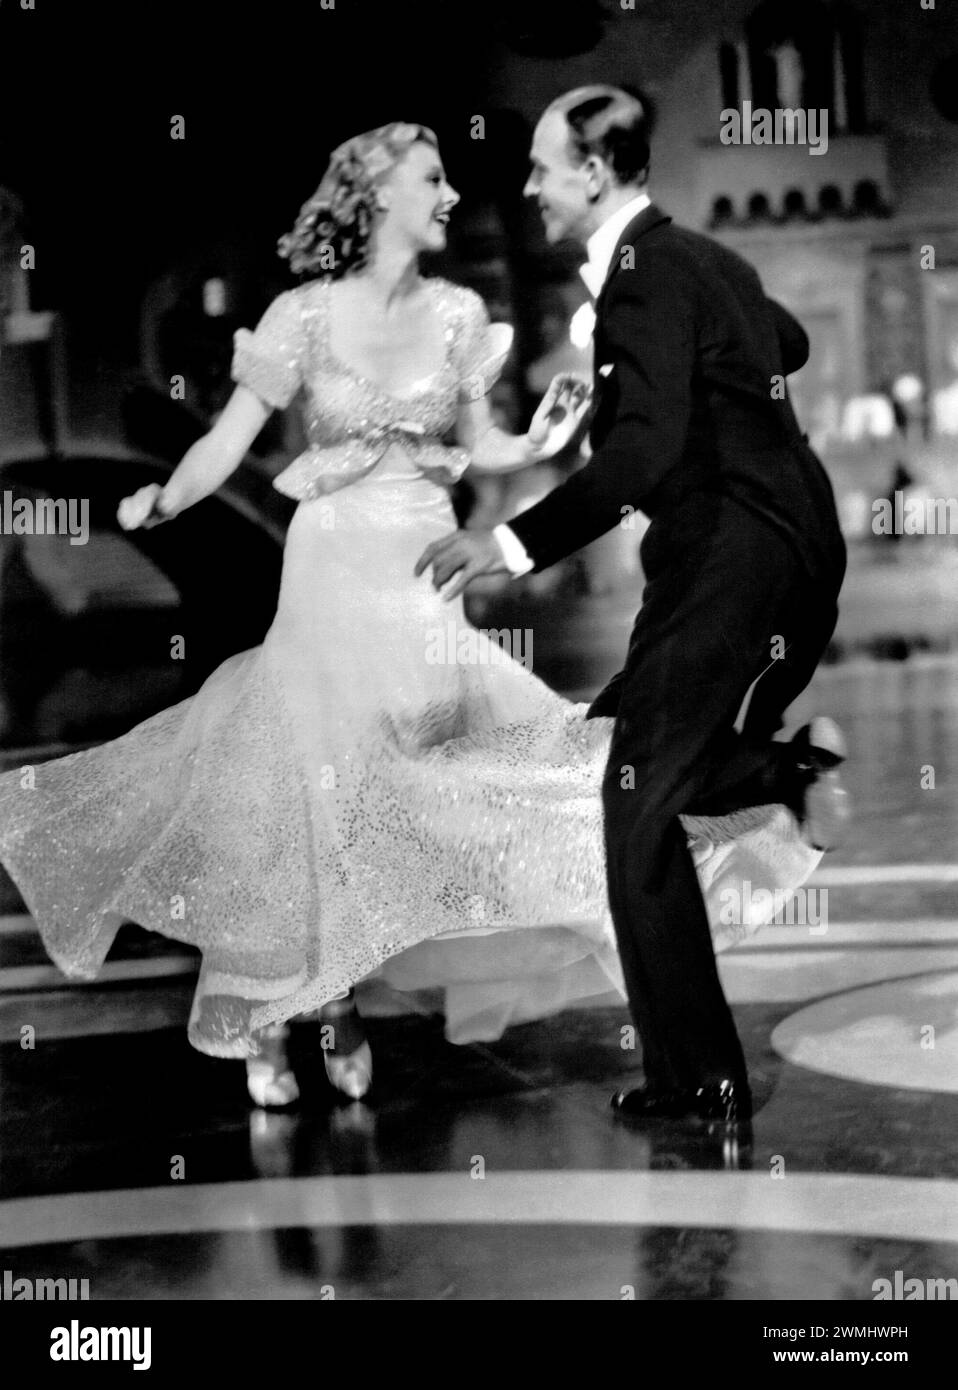 Fred Astaire and Ginger Rogers. Fred Astaire (b. Frederick Austerlitz;1899-1987) and Ginger Rogers (b. Virginia Katherine McMath; 1911-1995) in a promotional photo for Top Hat, 1935 Stock Photo